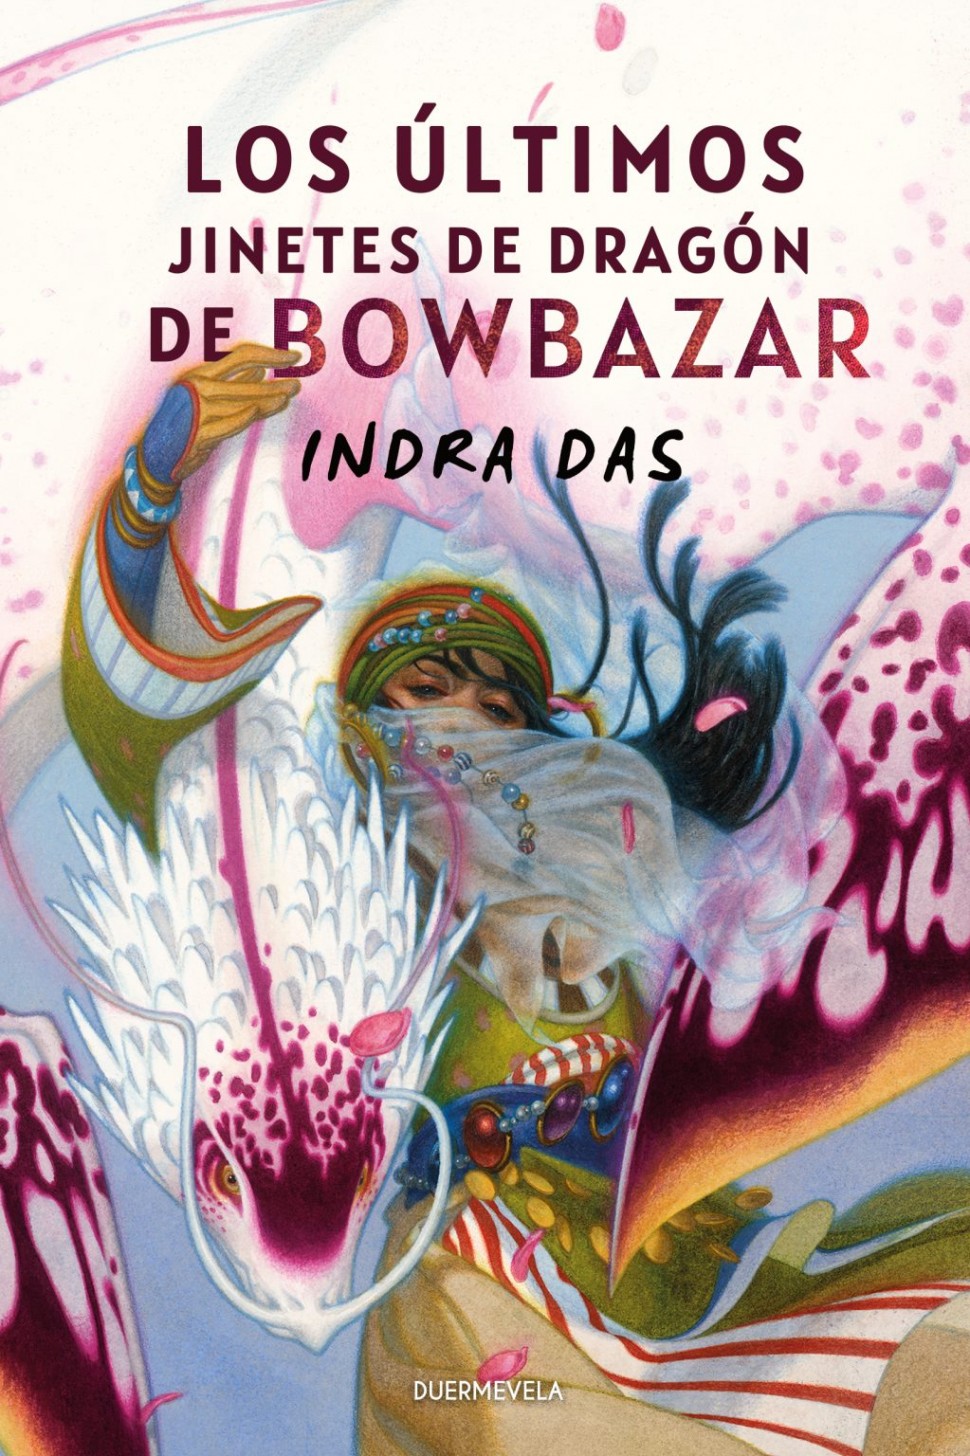 Cover of the Spanish edition of my novella The Last Dragoners of Bowbazar, painted by Tran Nguyen, showing a 'dragoner' of uncertain gender in colourful robes and a veil and headscarf, showing their eyes, long black hair flying, as they hold the neck of a dragon swooping down on their shoulder, its colouring white and speckled with varying shades of scarlet and burnt orange like the petals of a flower. Text reads: Los últimos jinetes de dragón de Bowbazar, and my name (Indra Das).